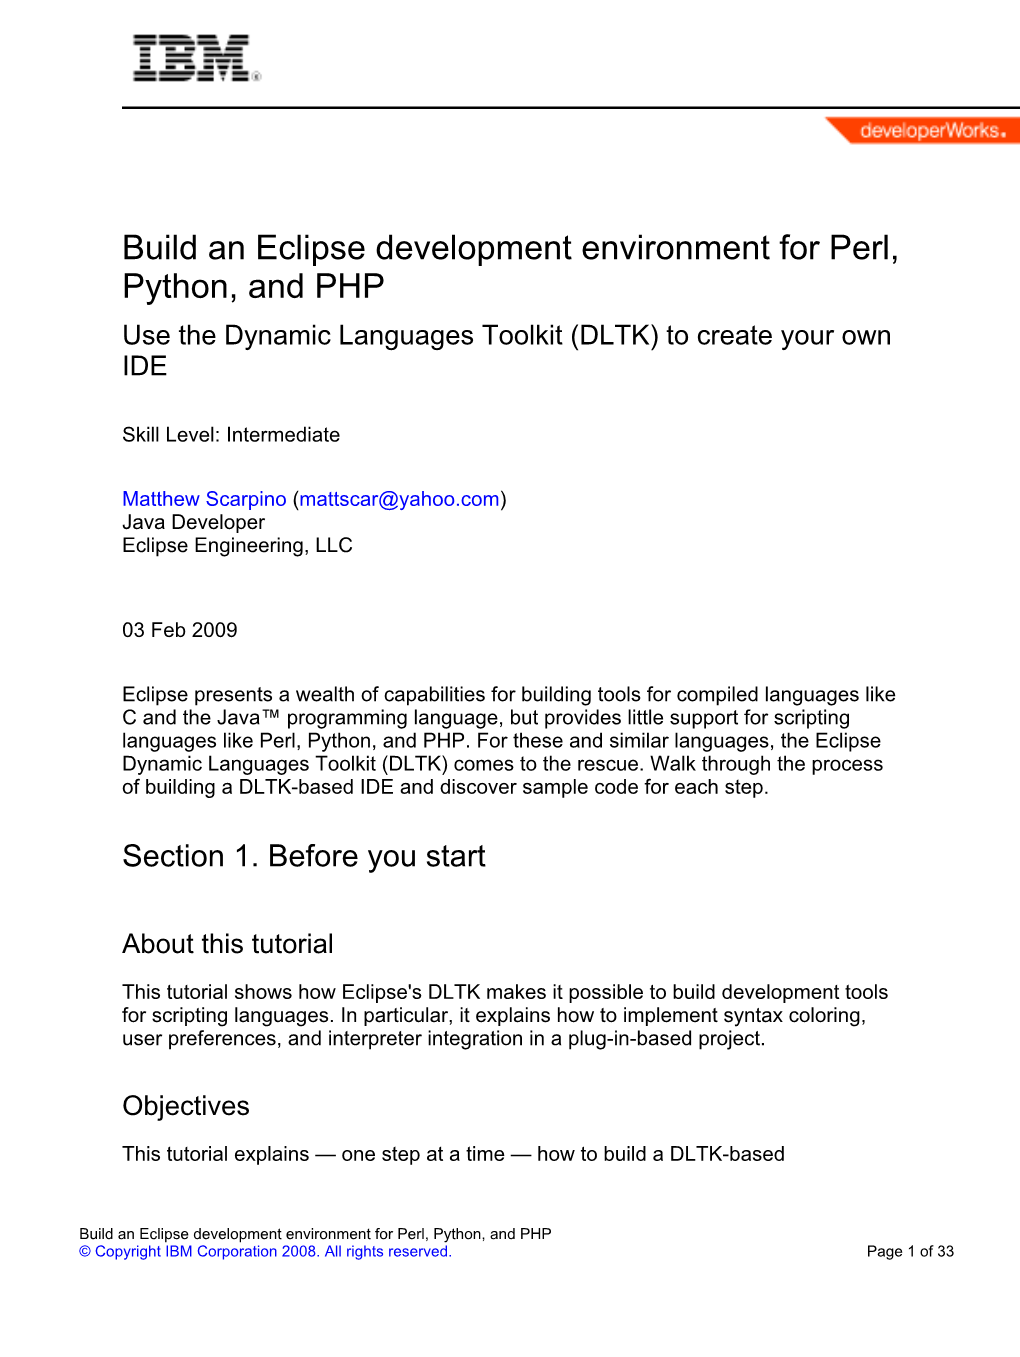 Build an Eclipse Development Environment for Perl, Python, and PHP Use the Dynamic Languages Toolkit (DLTK) to Create Your Own IDE